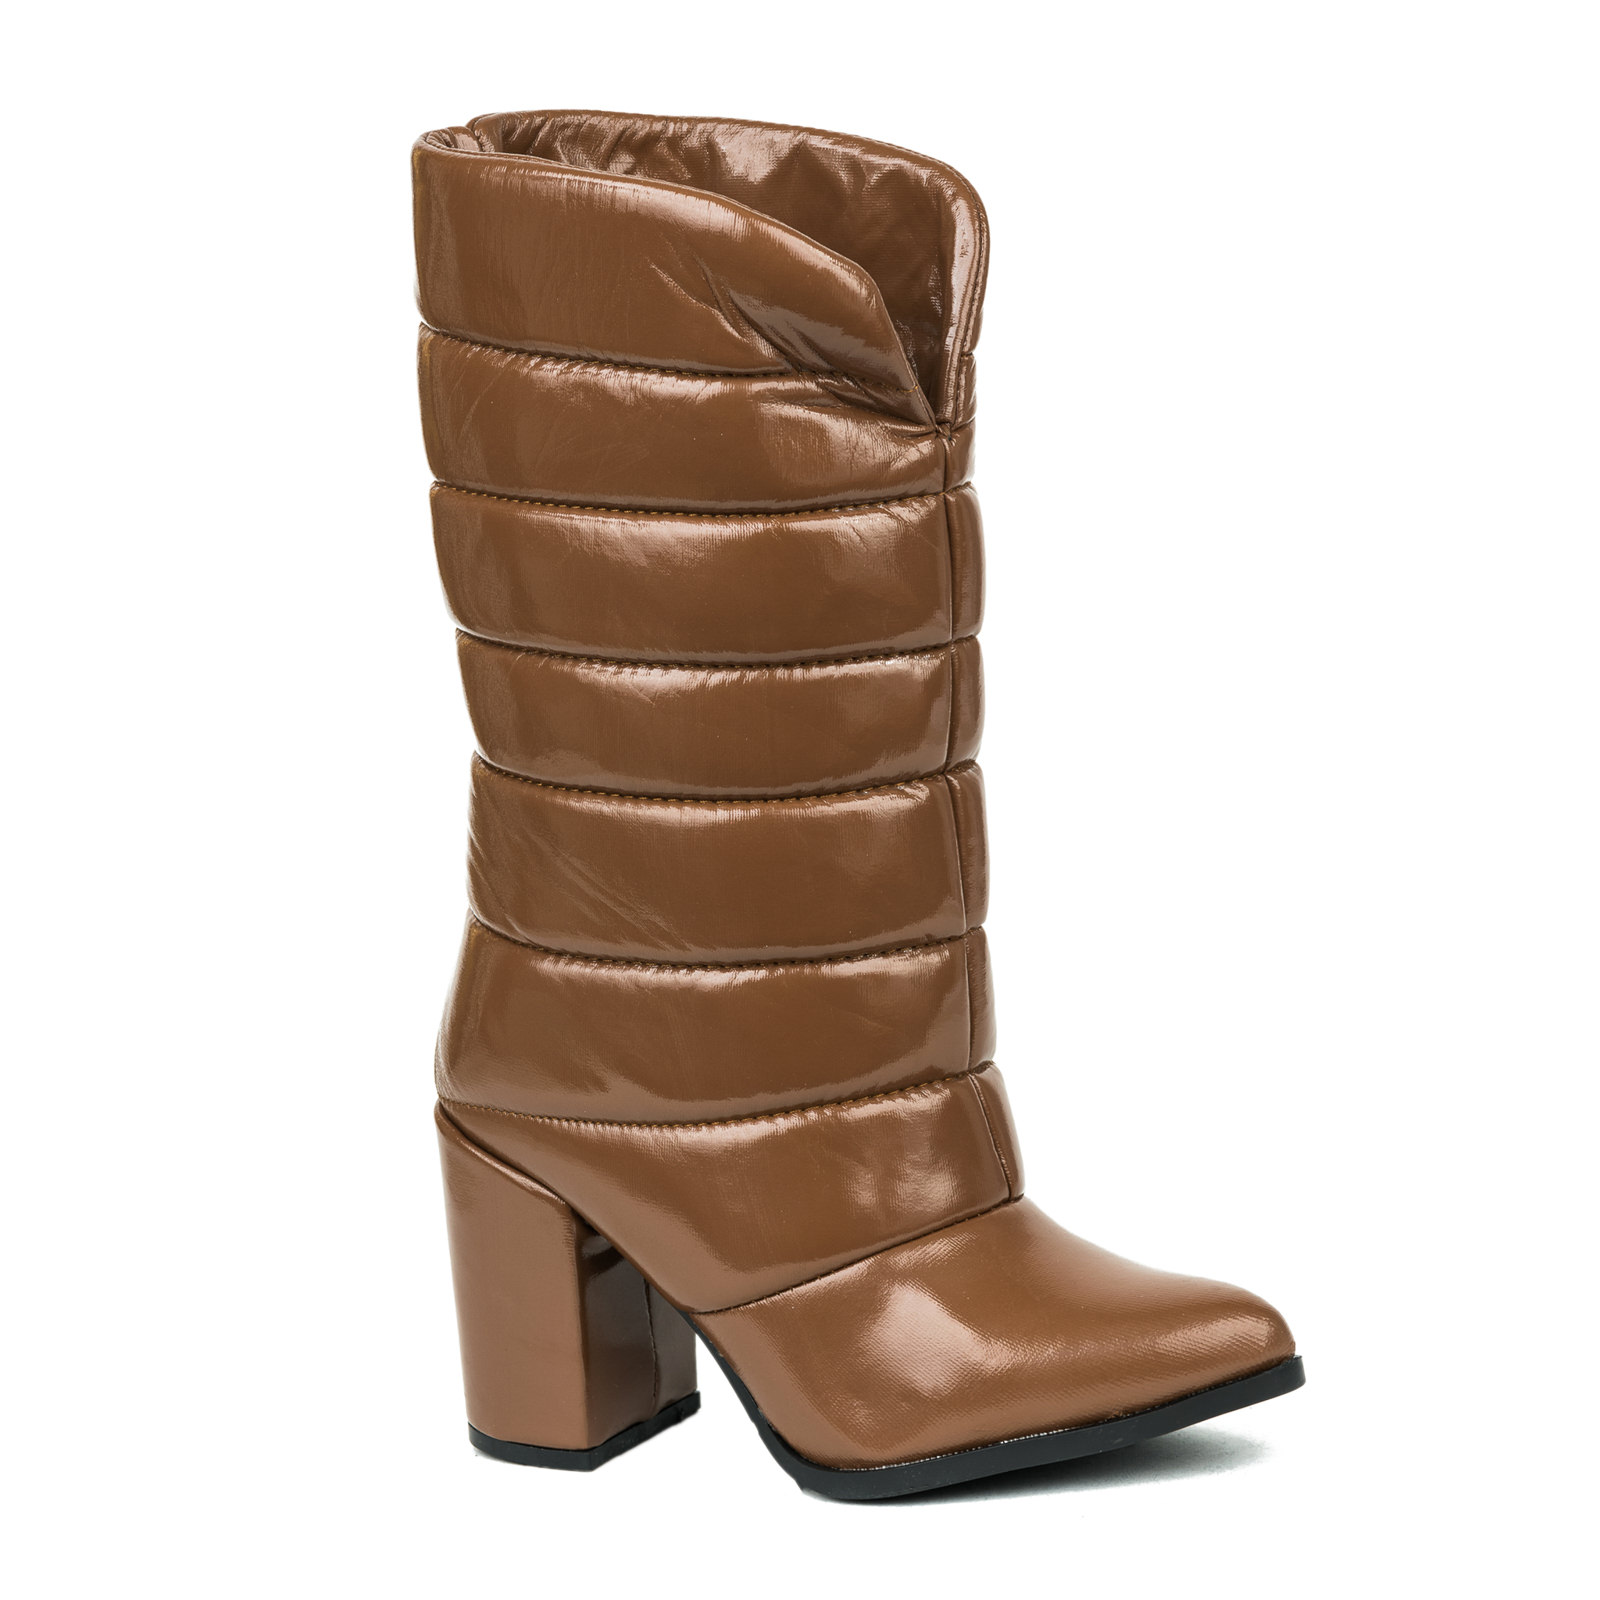 Women ankle boots B139 - CAMEL